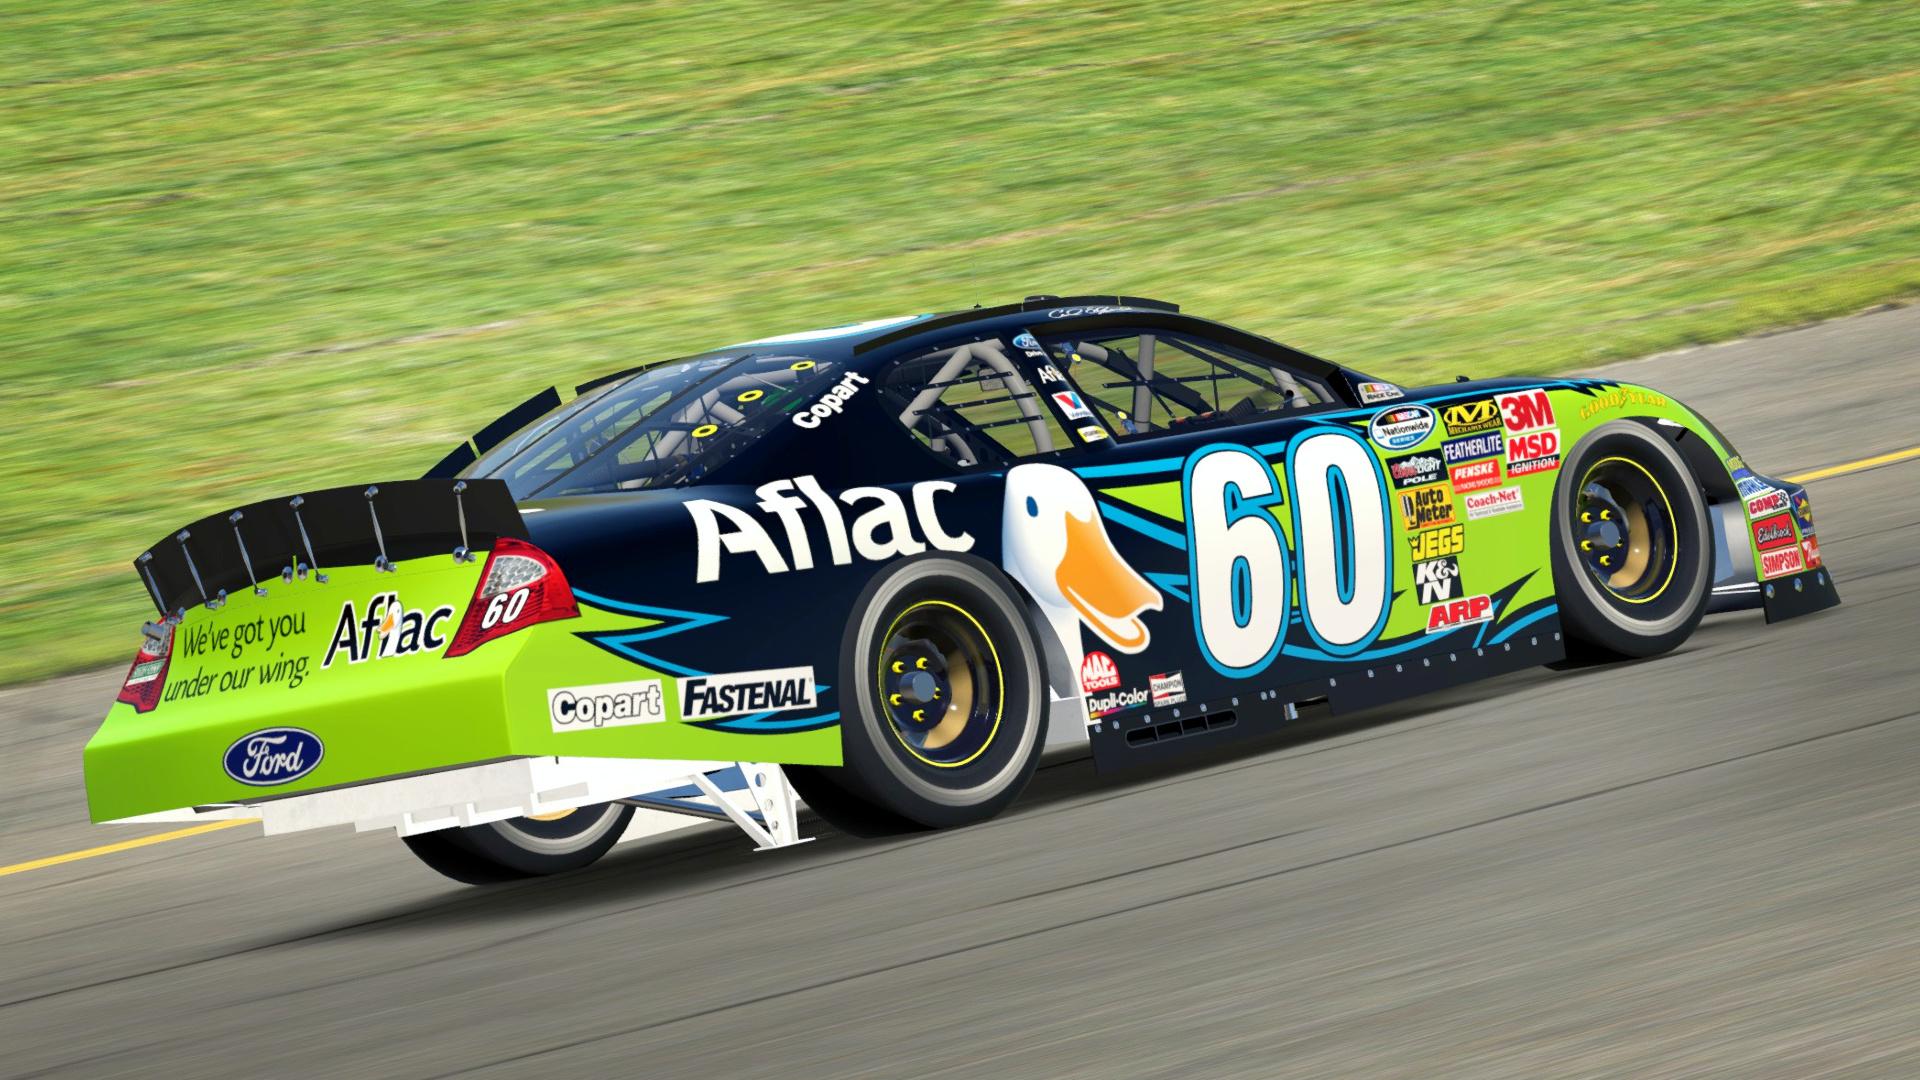 Preview of 2010 Carl Edwards Aflac Ford Fusion by Davin Cornelius